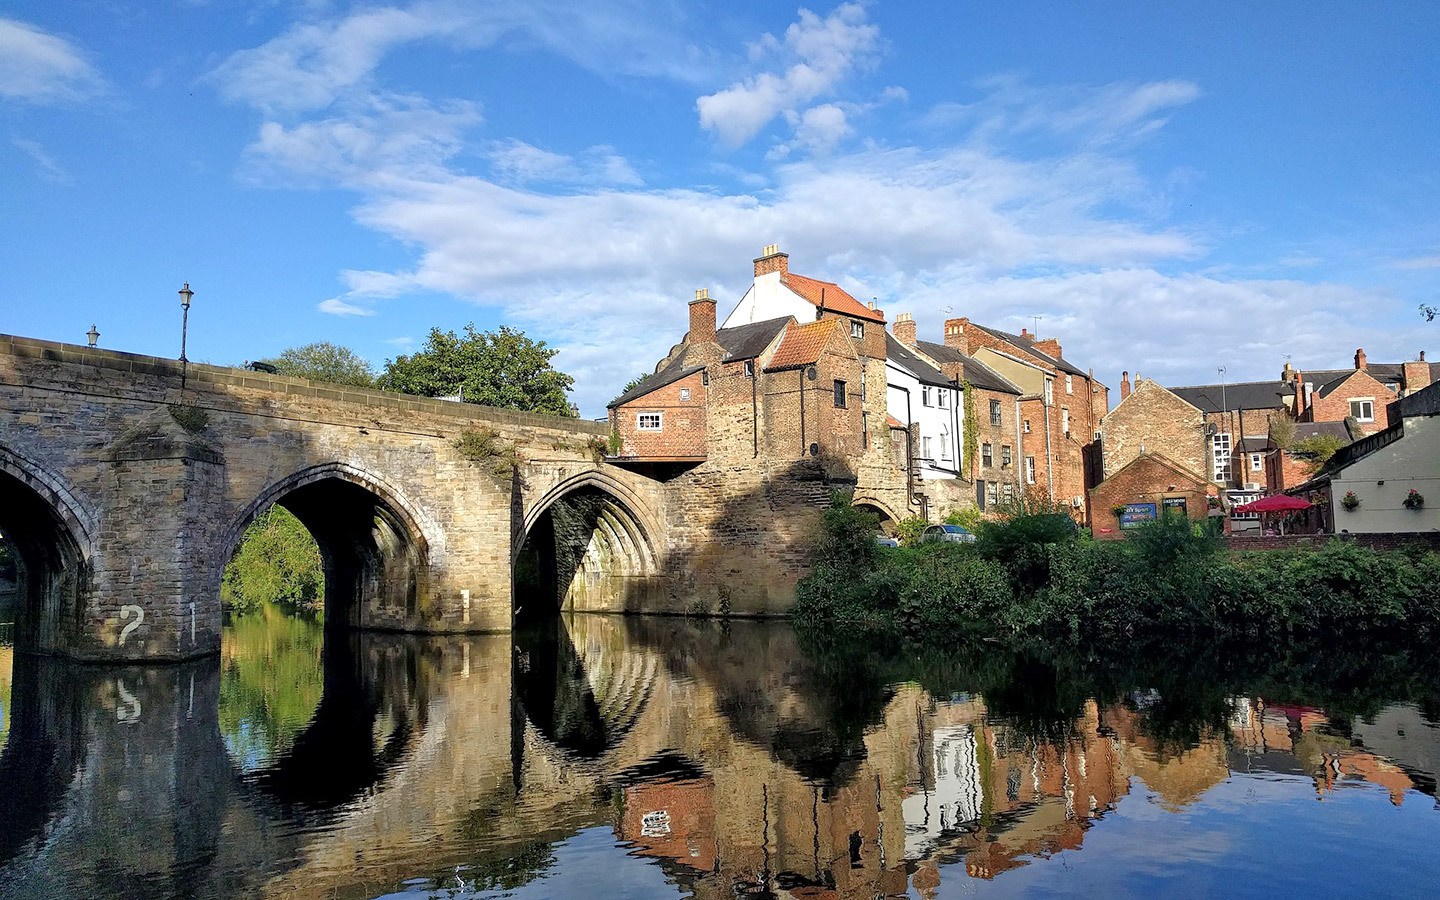 Bridge and buildings on the riverside in Durham, an alternative to visiting Oxford